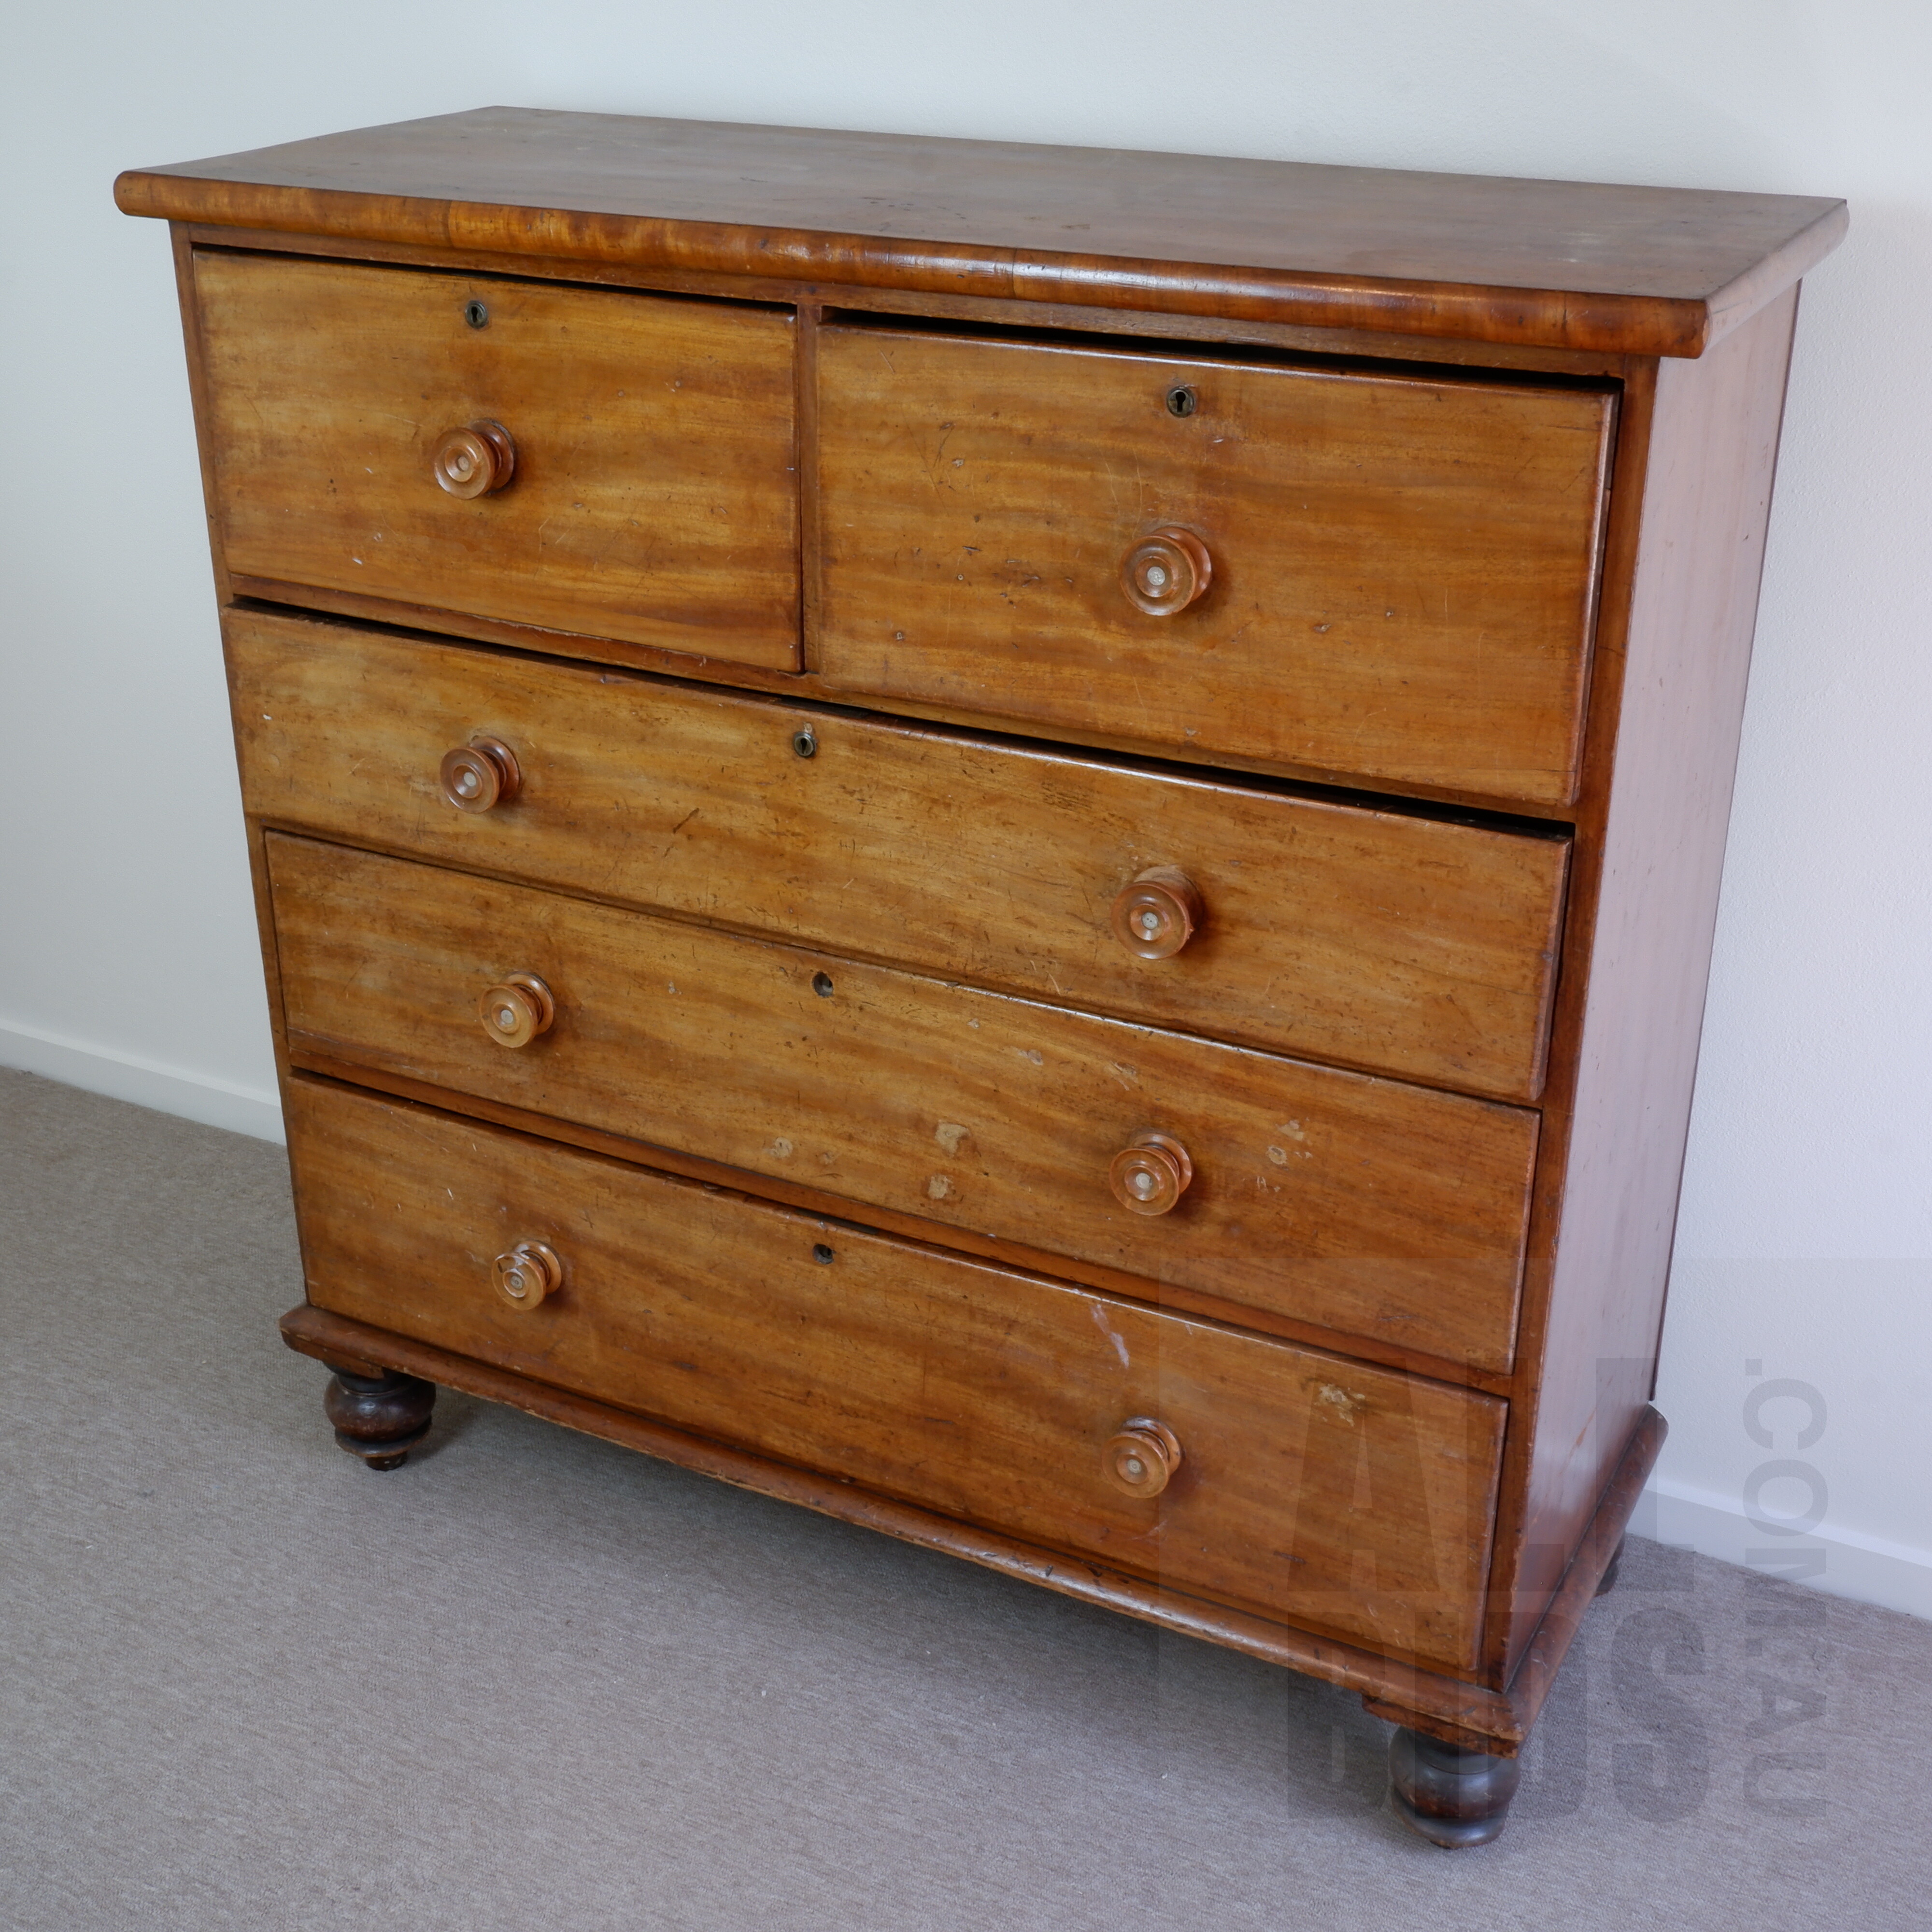 'Antique Australian Full Cedar Chest of Drawers, Including Dust Linings and Backboard, Mid 19th Century'